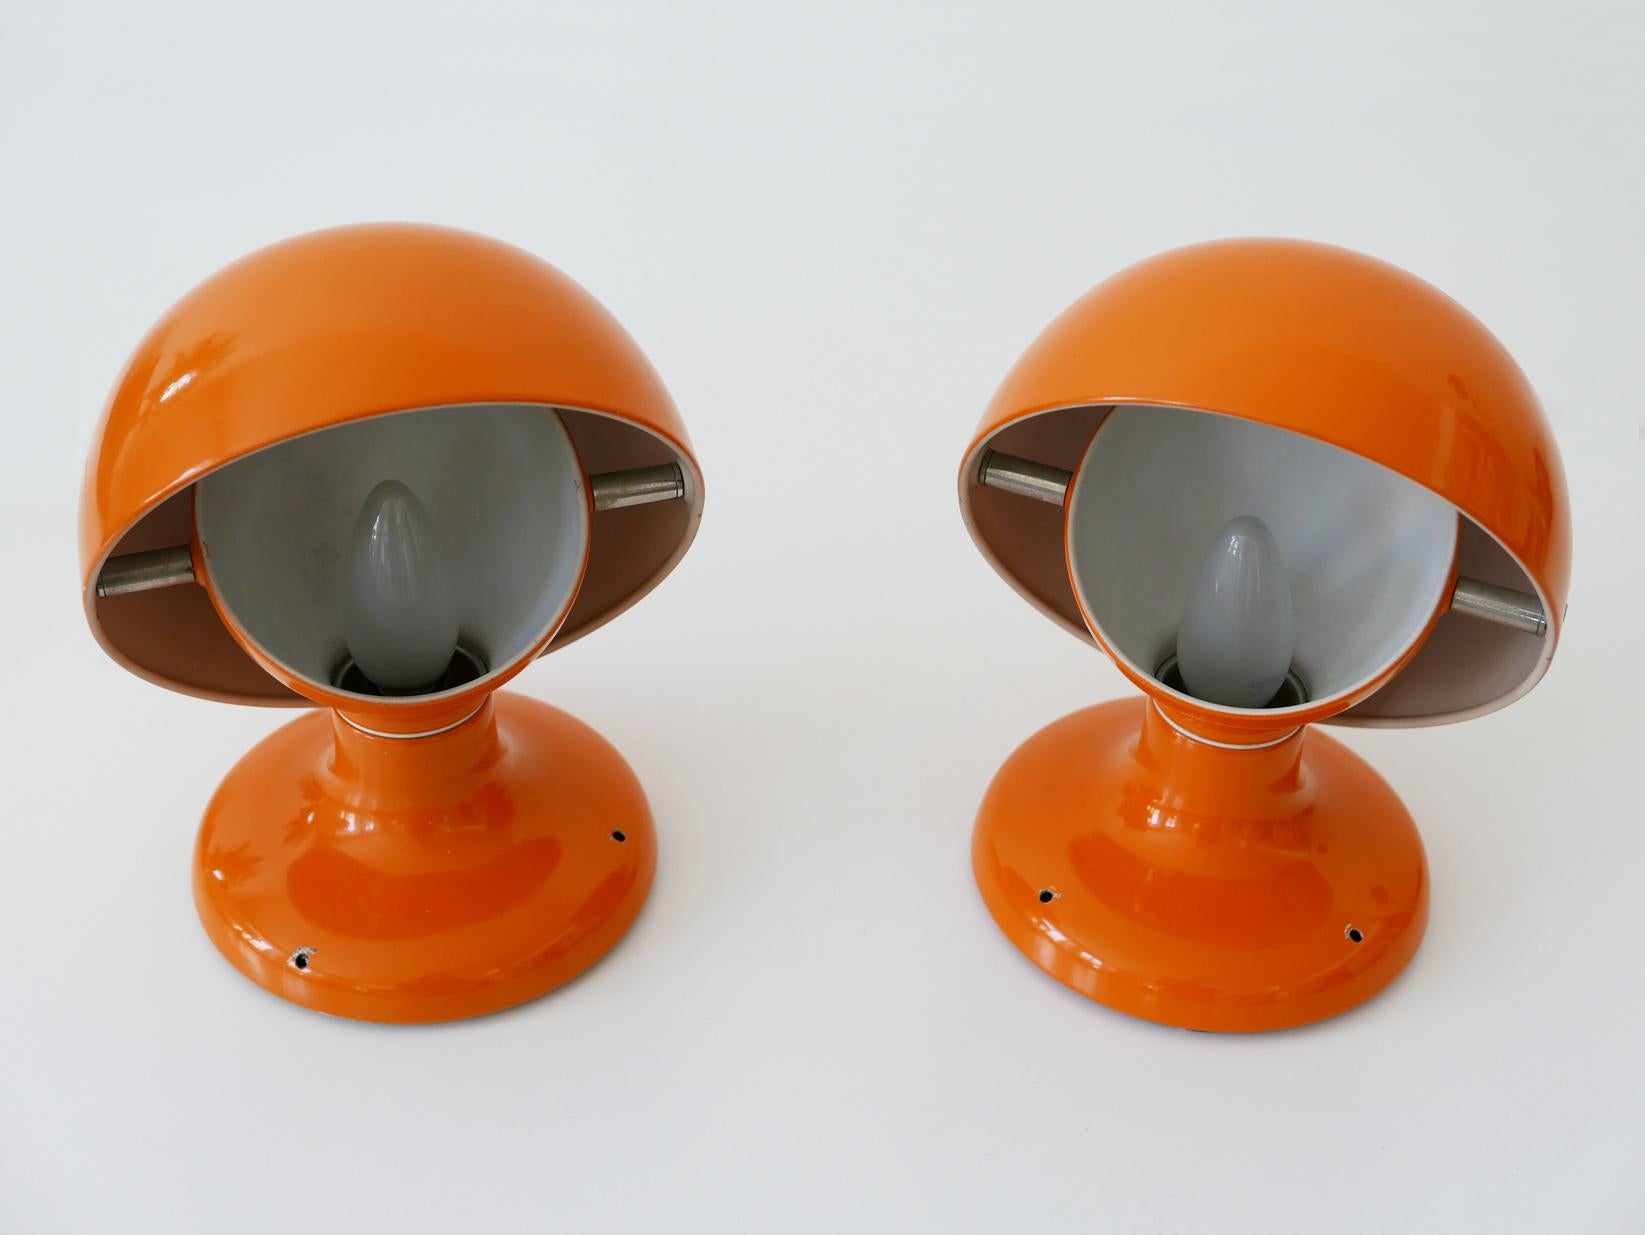 Pair of Mid-Century Modern Jucker Table Lamps by Afra & Tobia Scarpa, 1960s For Sale 3